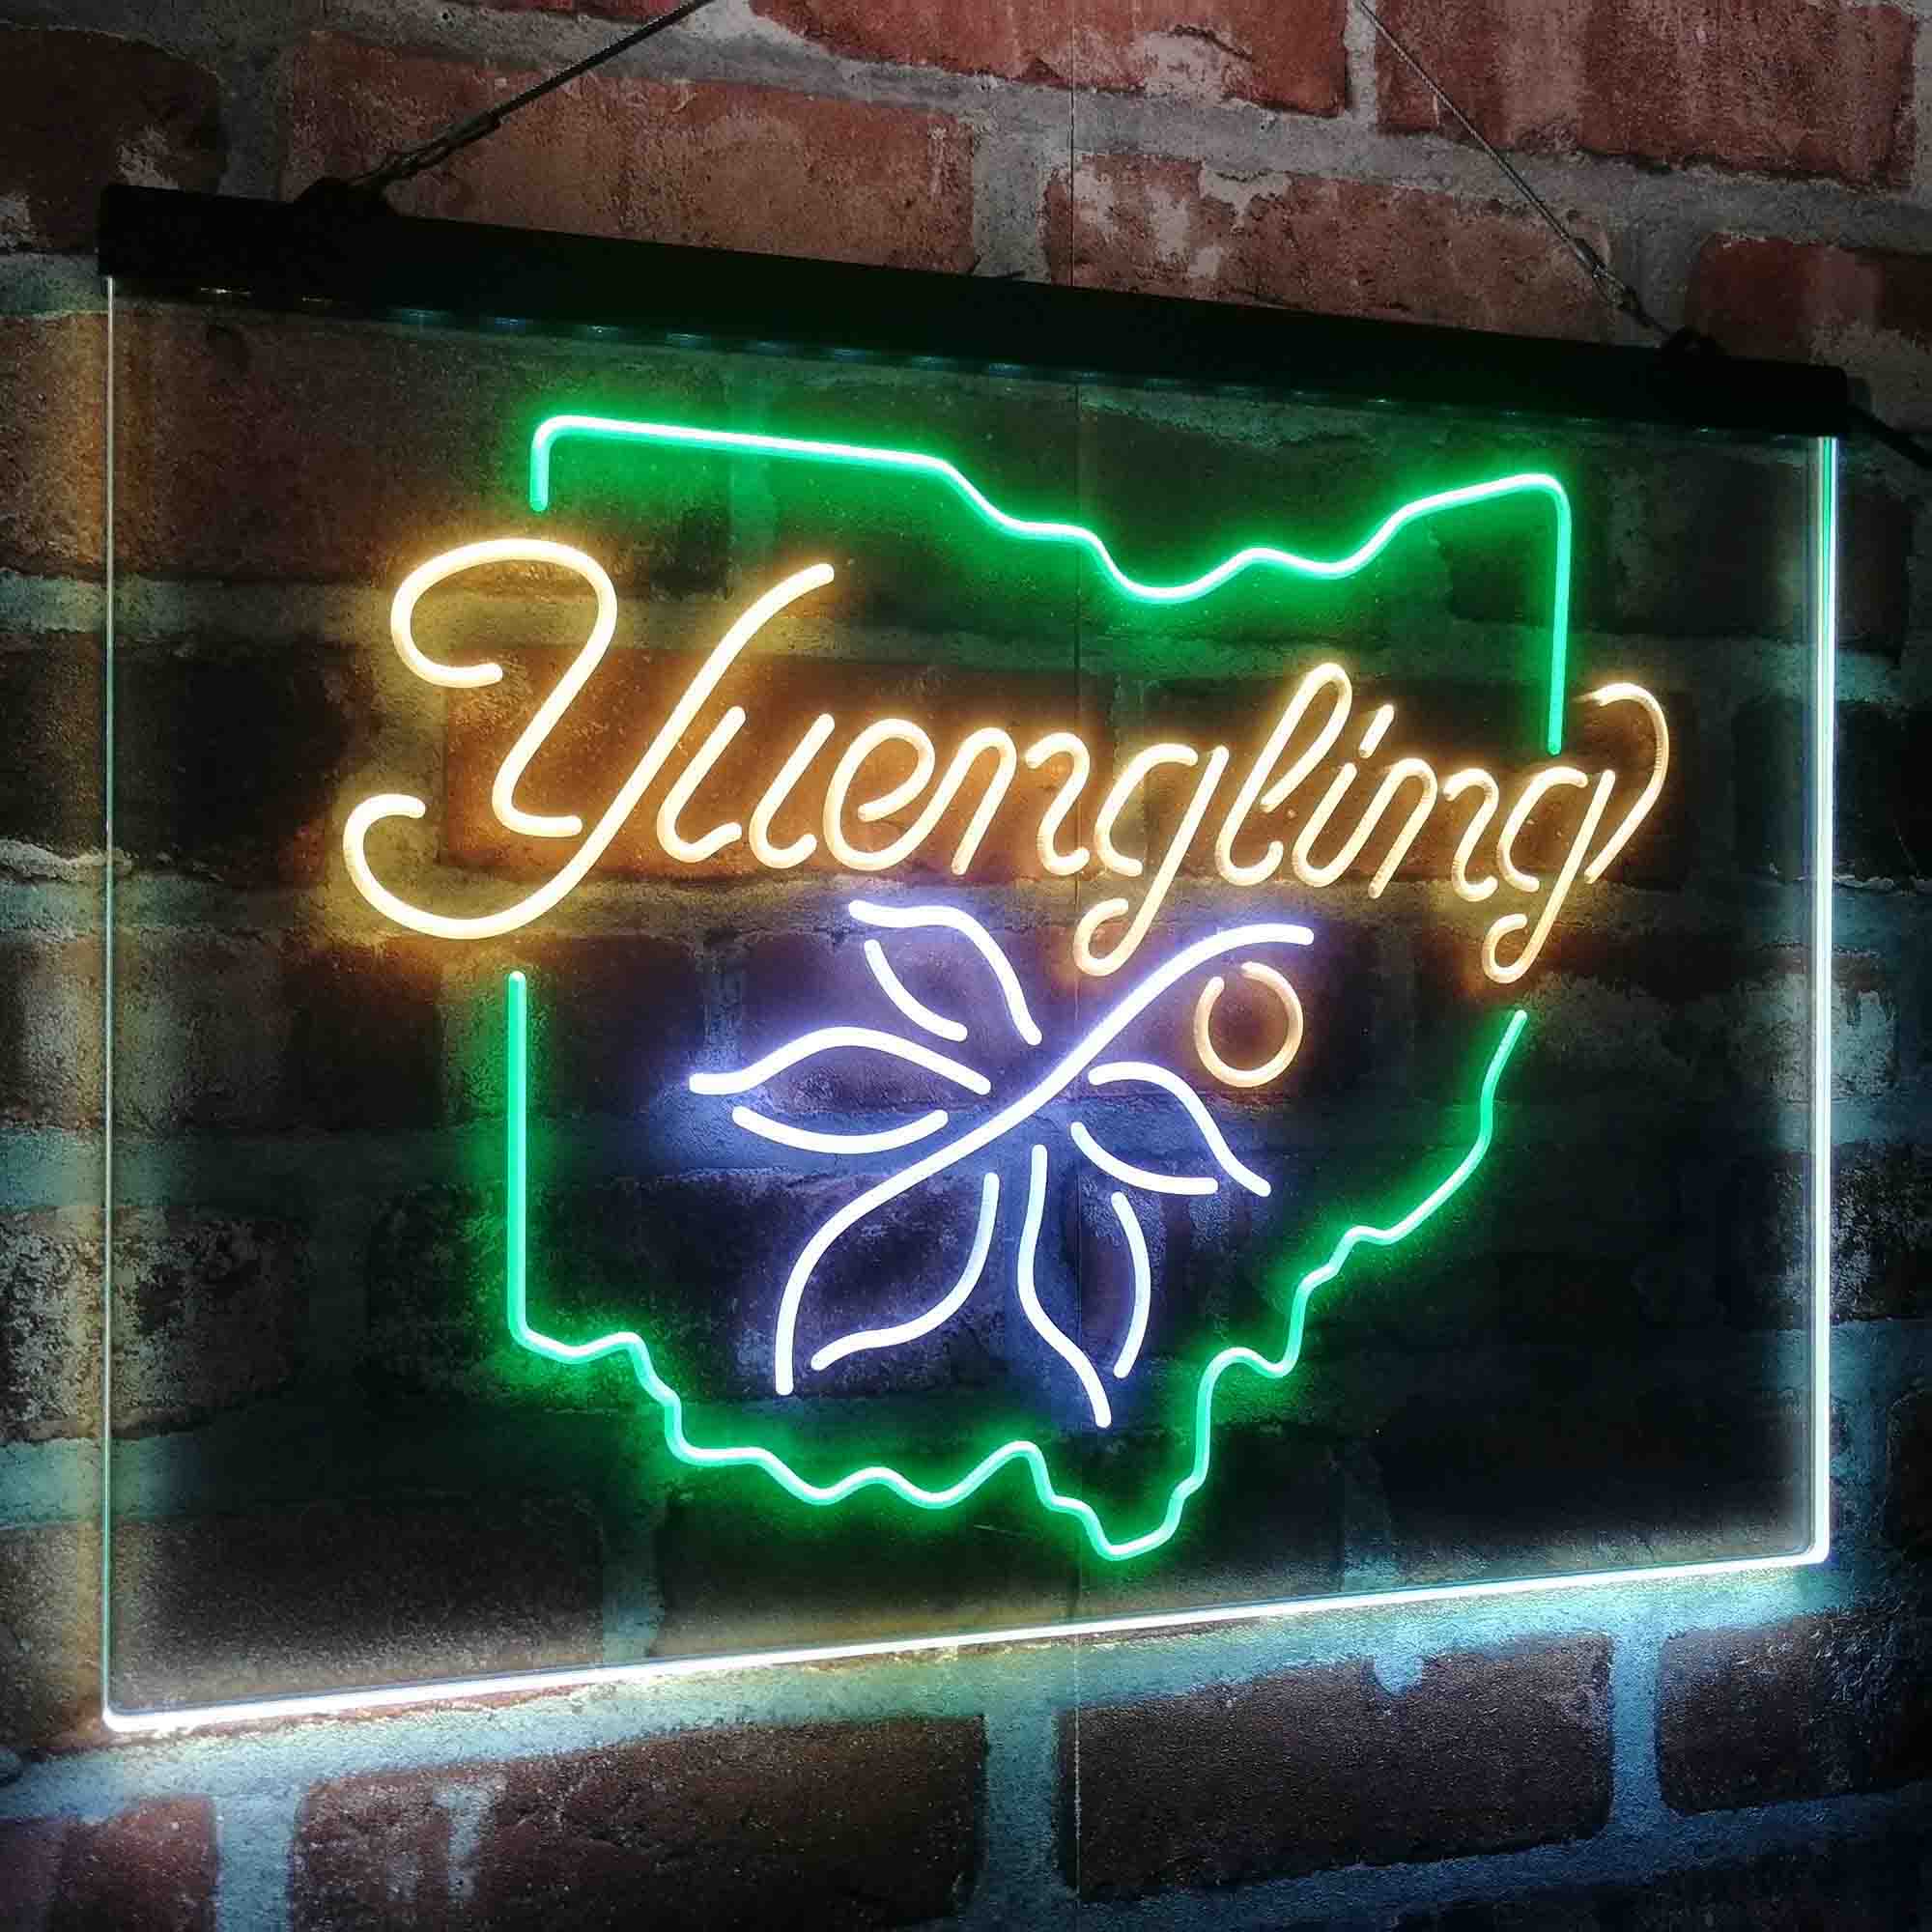 Yuengling Ohio State Buckeye Larger Beer Neon LED Sign 3 Colors